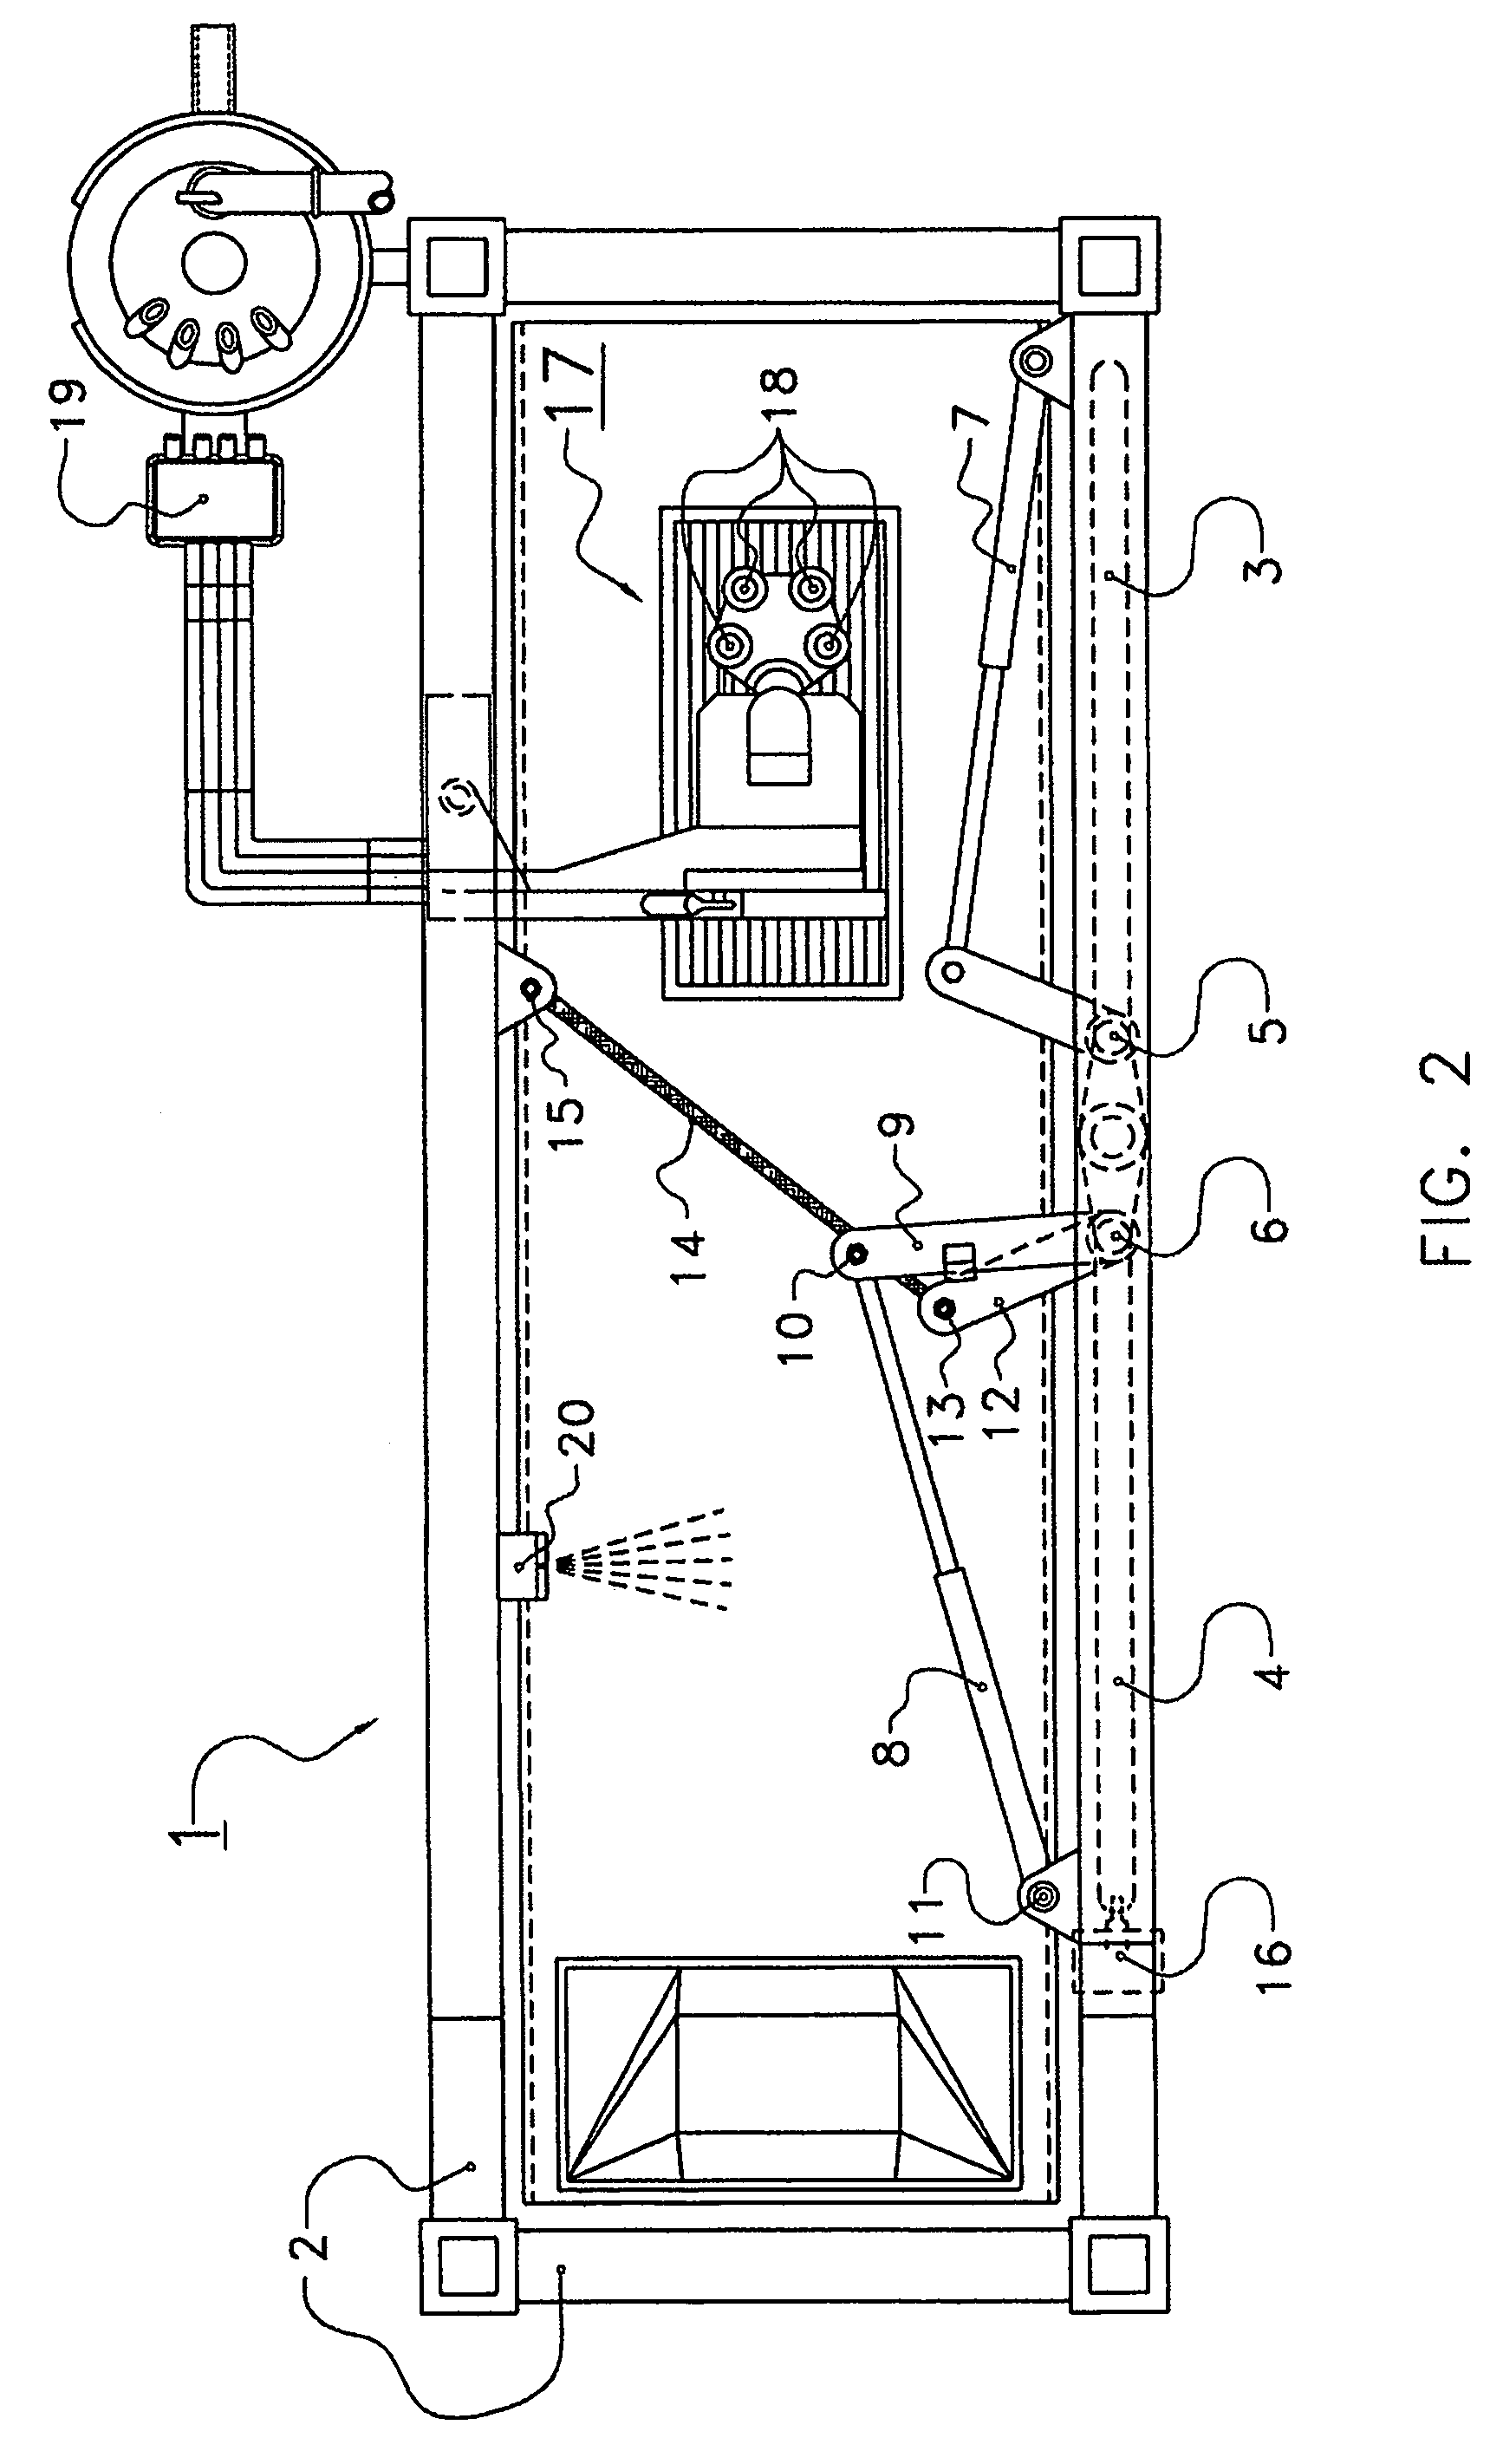 Device for managing animal traffic